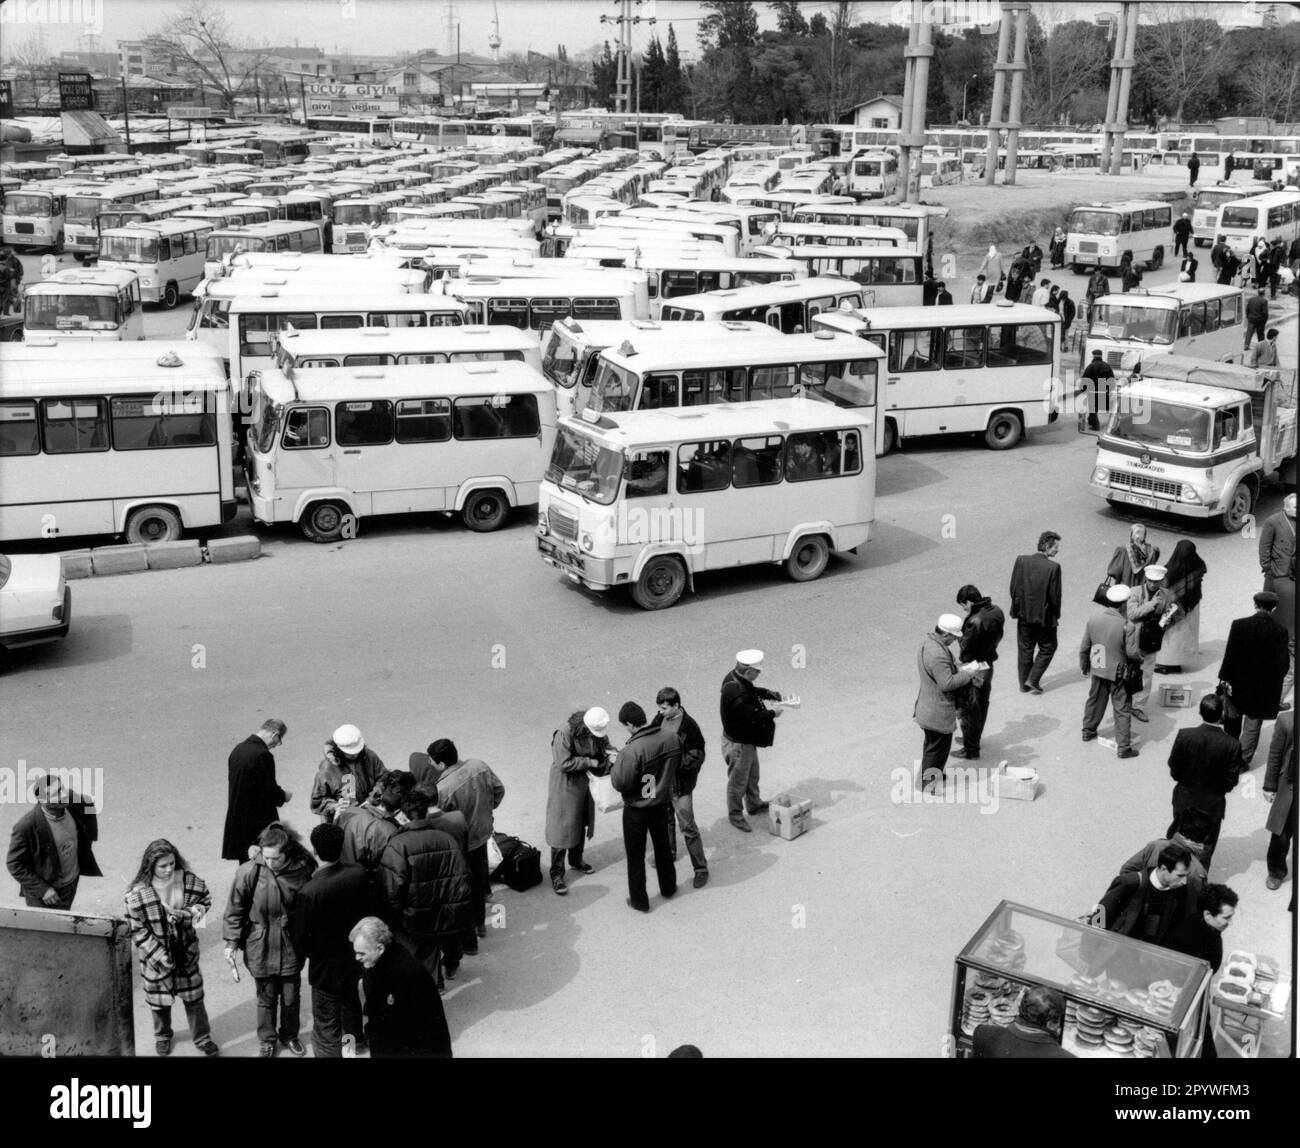 Istanbul (Turkey), Topkapi bus station. Buses and travelers, street scene: Parking lot with buses, travelers buy tickets and wait for departure. Black-and-white. Photo, 1994. Stock Photo